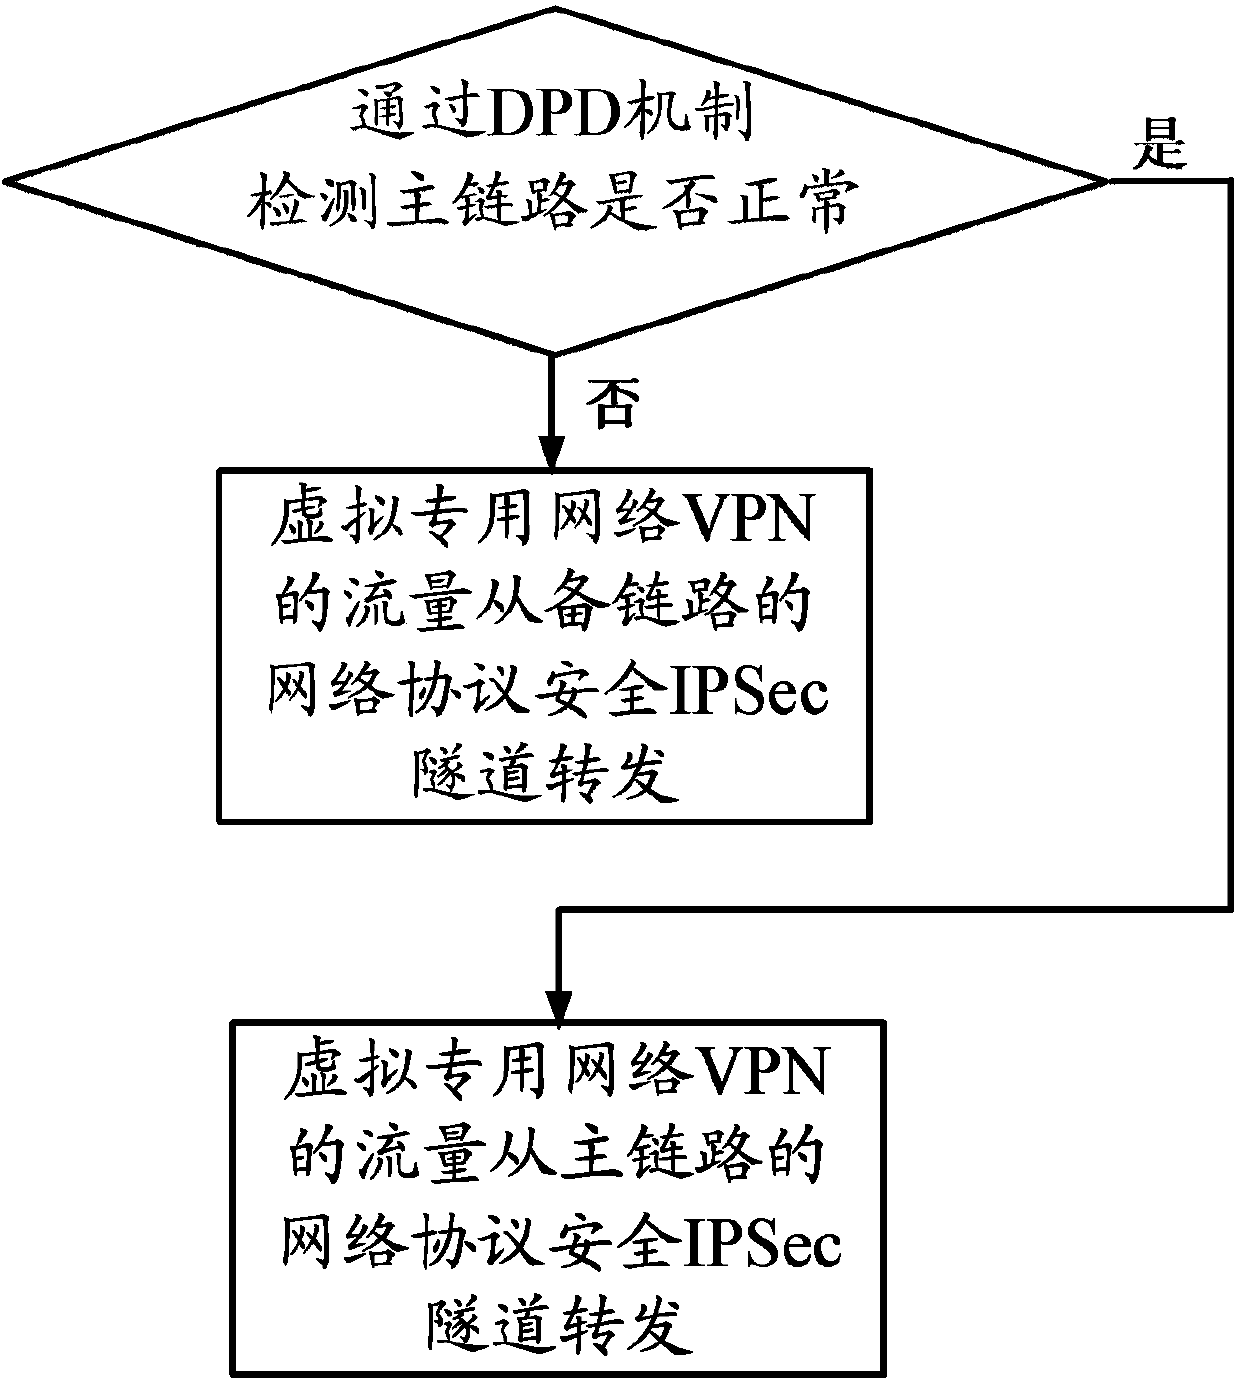 Method for achieving IPSecVPN main link and backup link dynamic switching